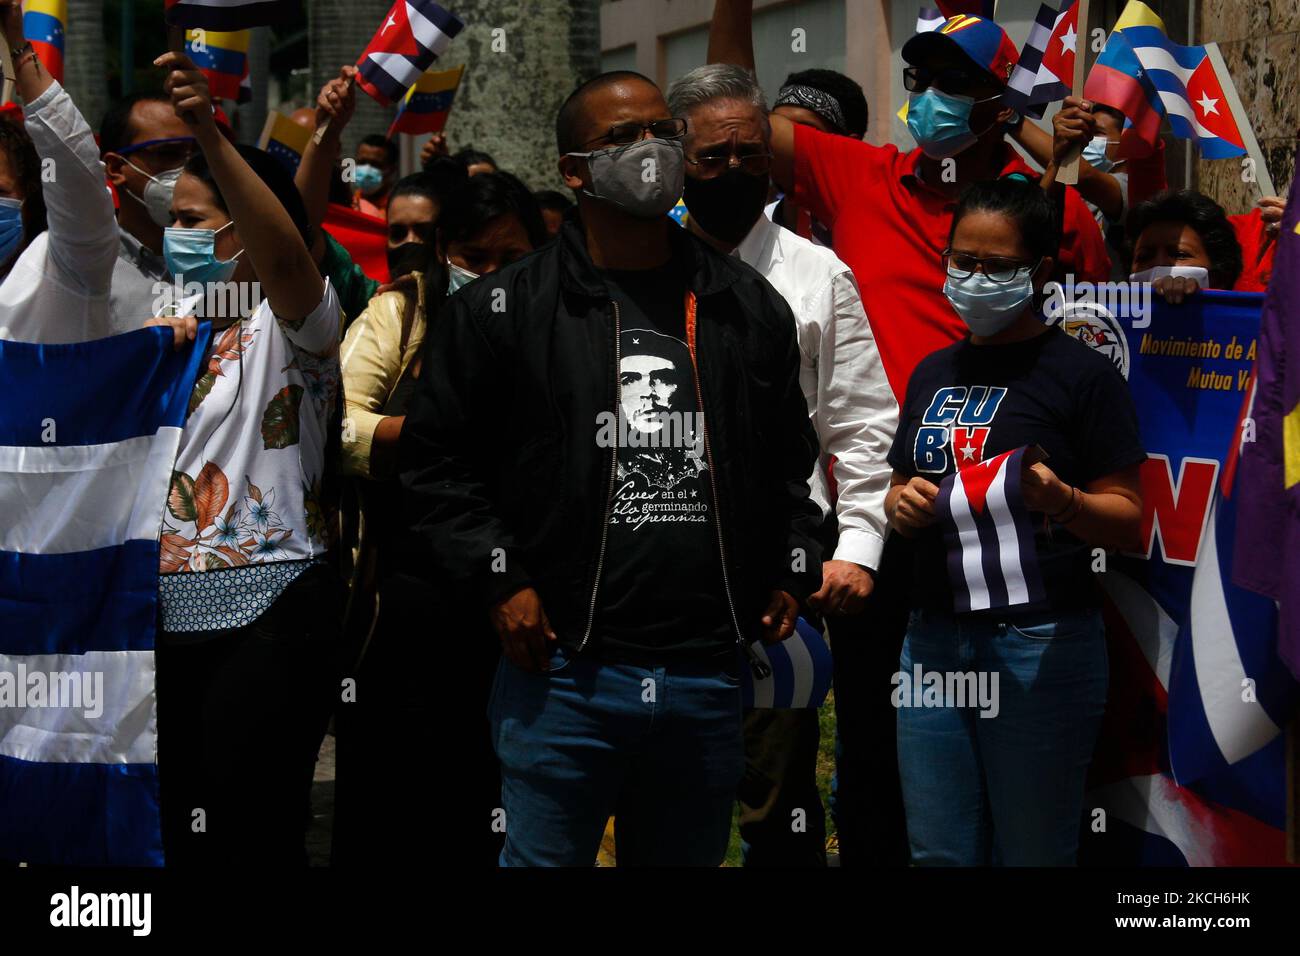 A man wearing an Ernesto Che Guevara shirt takes part in a rally in support with the Cuban government and its supporters, in front of the embassy in Caracas, Venezuela on July 12, 2021 (Photo by Javier Campos/NurPhoto) Stock Photo